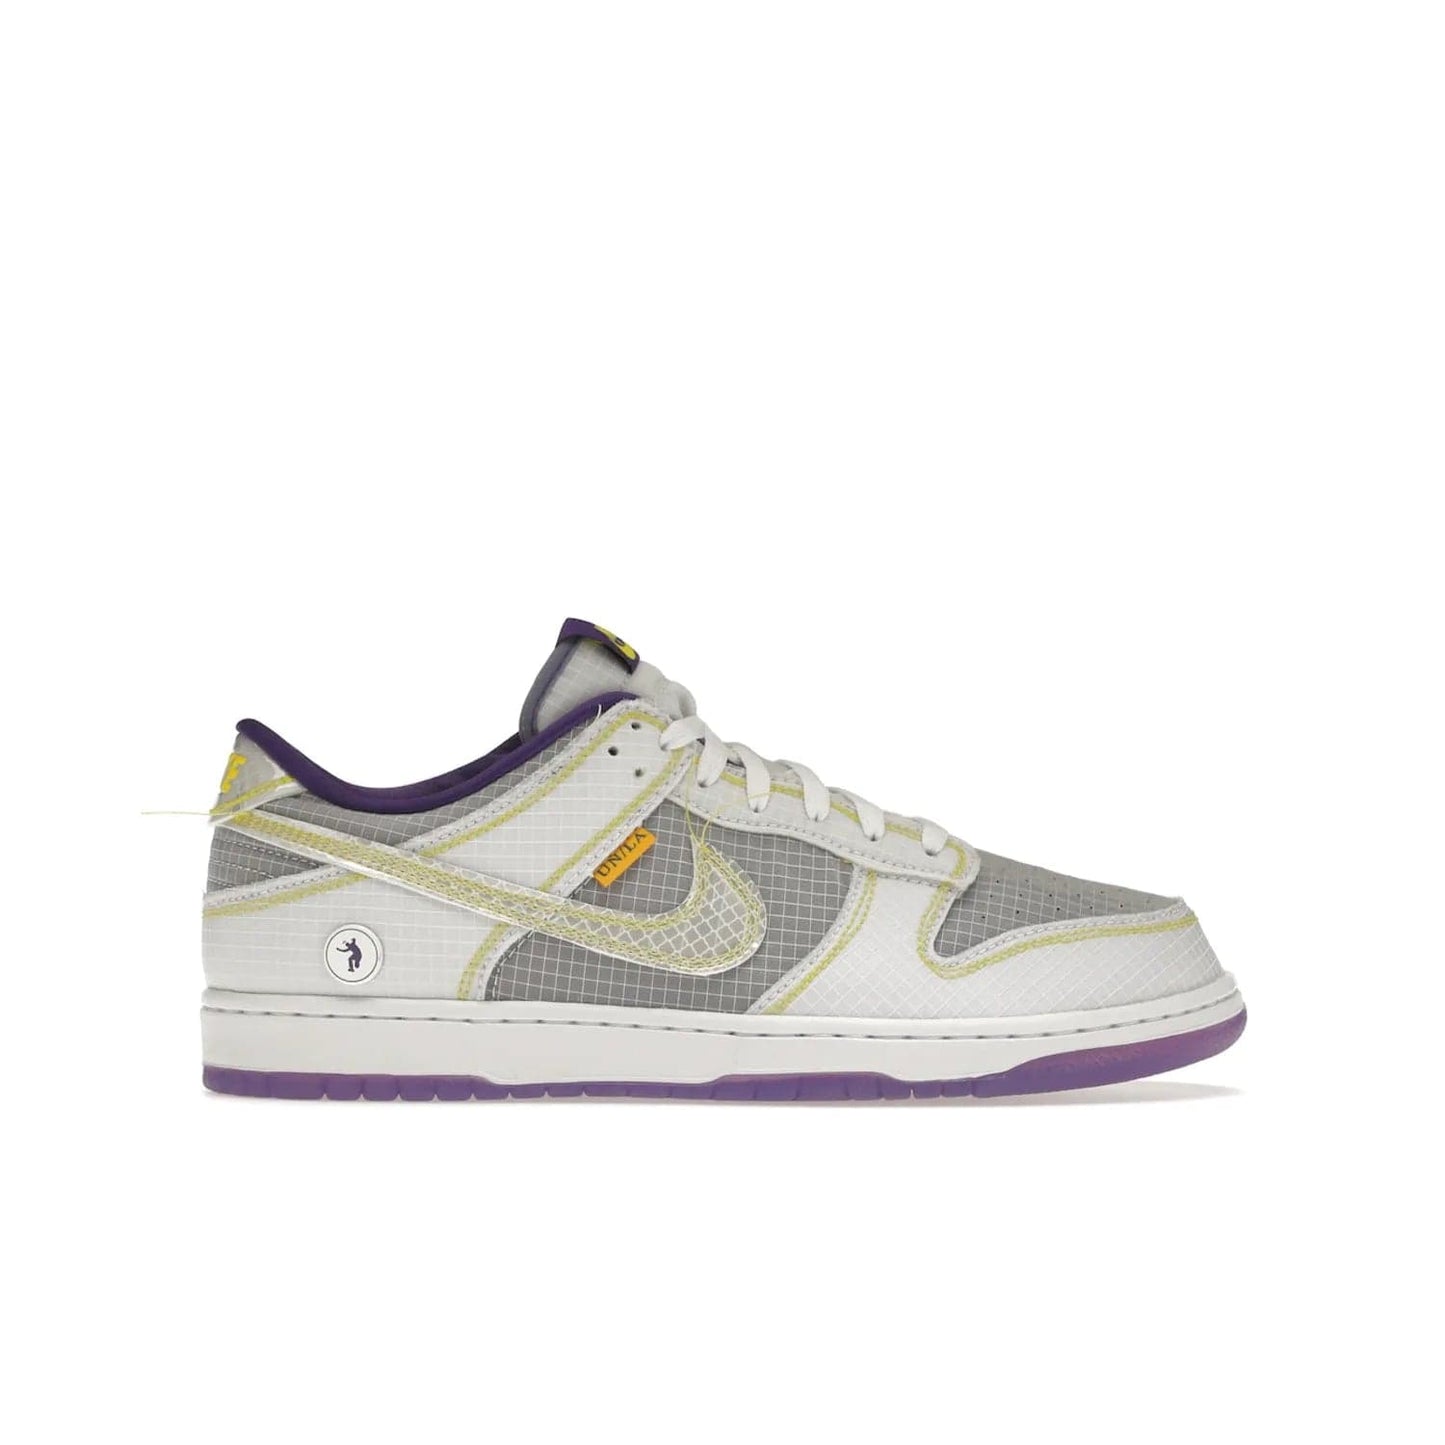 Nike Dunk Low Union Passport Pack Court Purple - Image 1 - Only at www.BallersClubKickz.com - Nike Dunk Low Union LA Passport Pack Court Purple features Court Purple and white smooth leather construction and Union LA Frontman logo on the heel. Releasing in April of 2022, this iconic shoe will make a splash in the streetwear world.